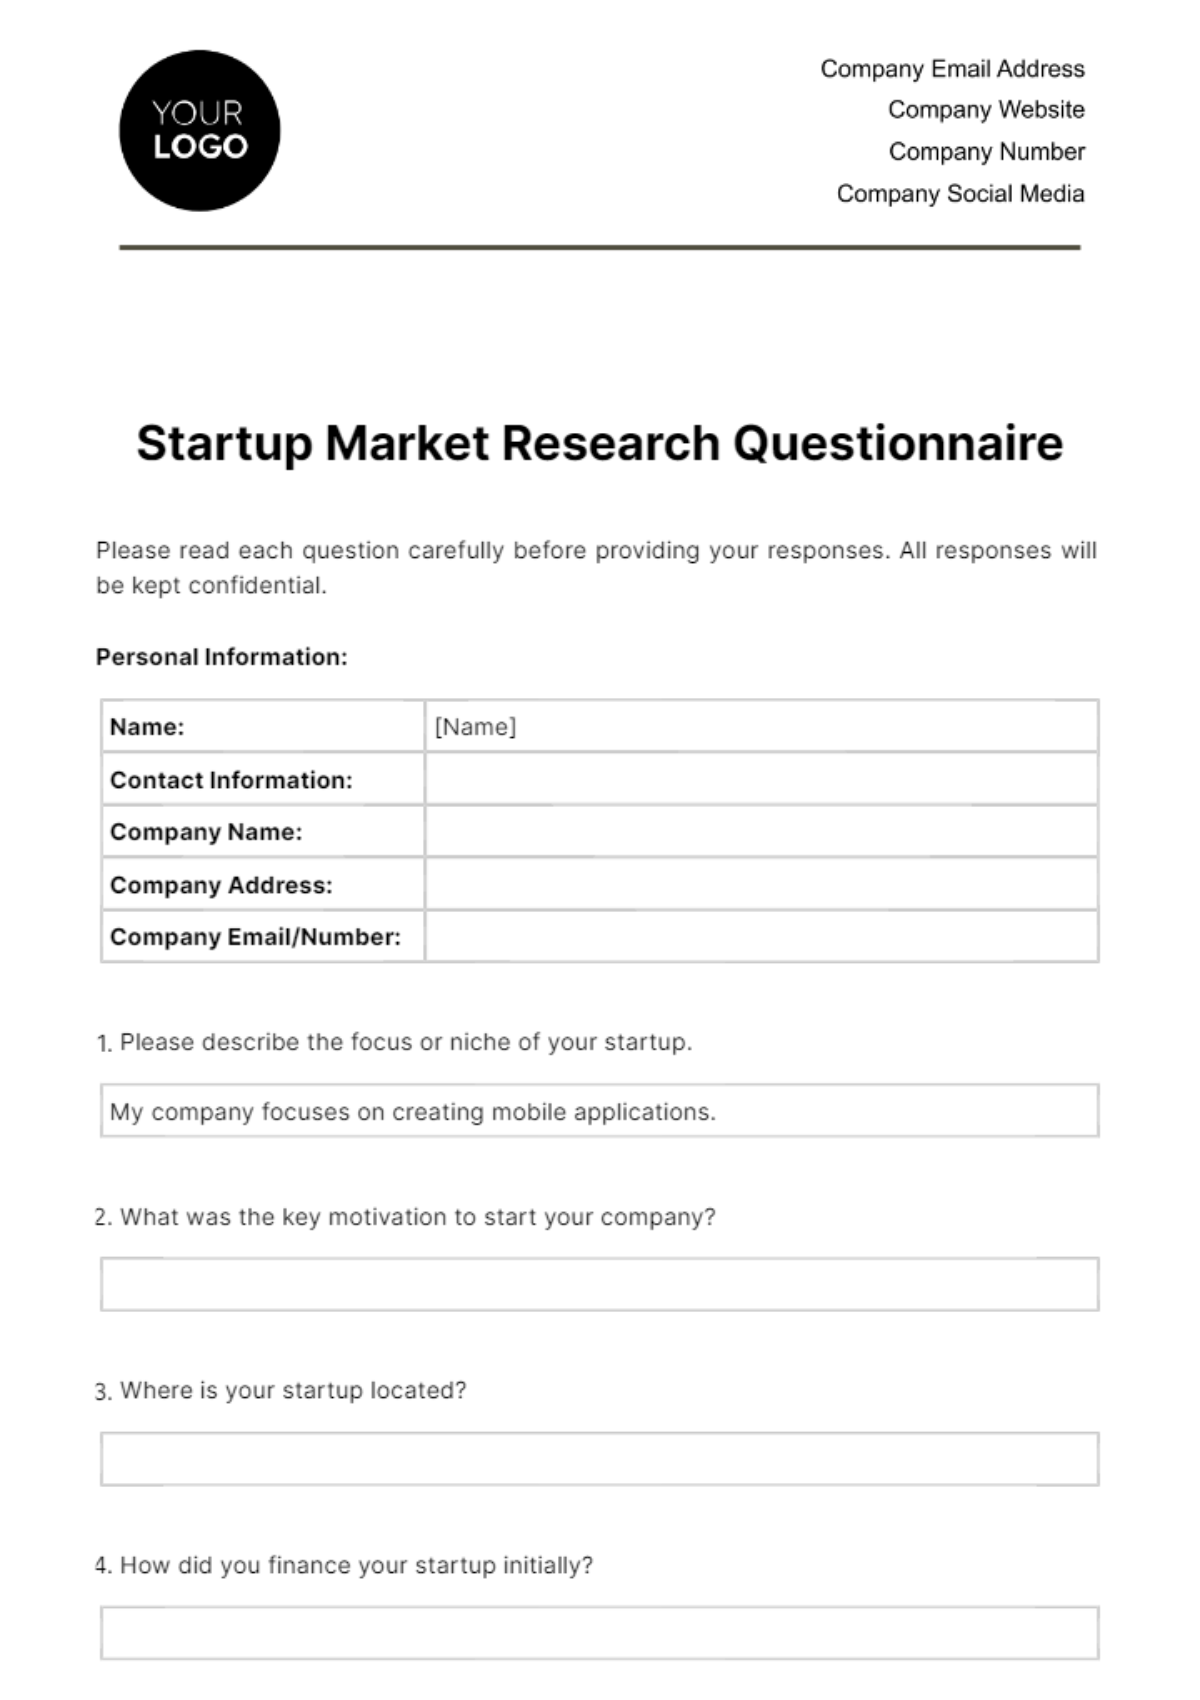 Startup Market Research Questionnaire Template